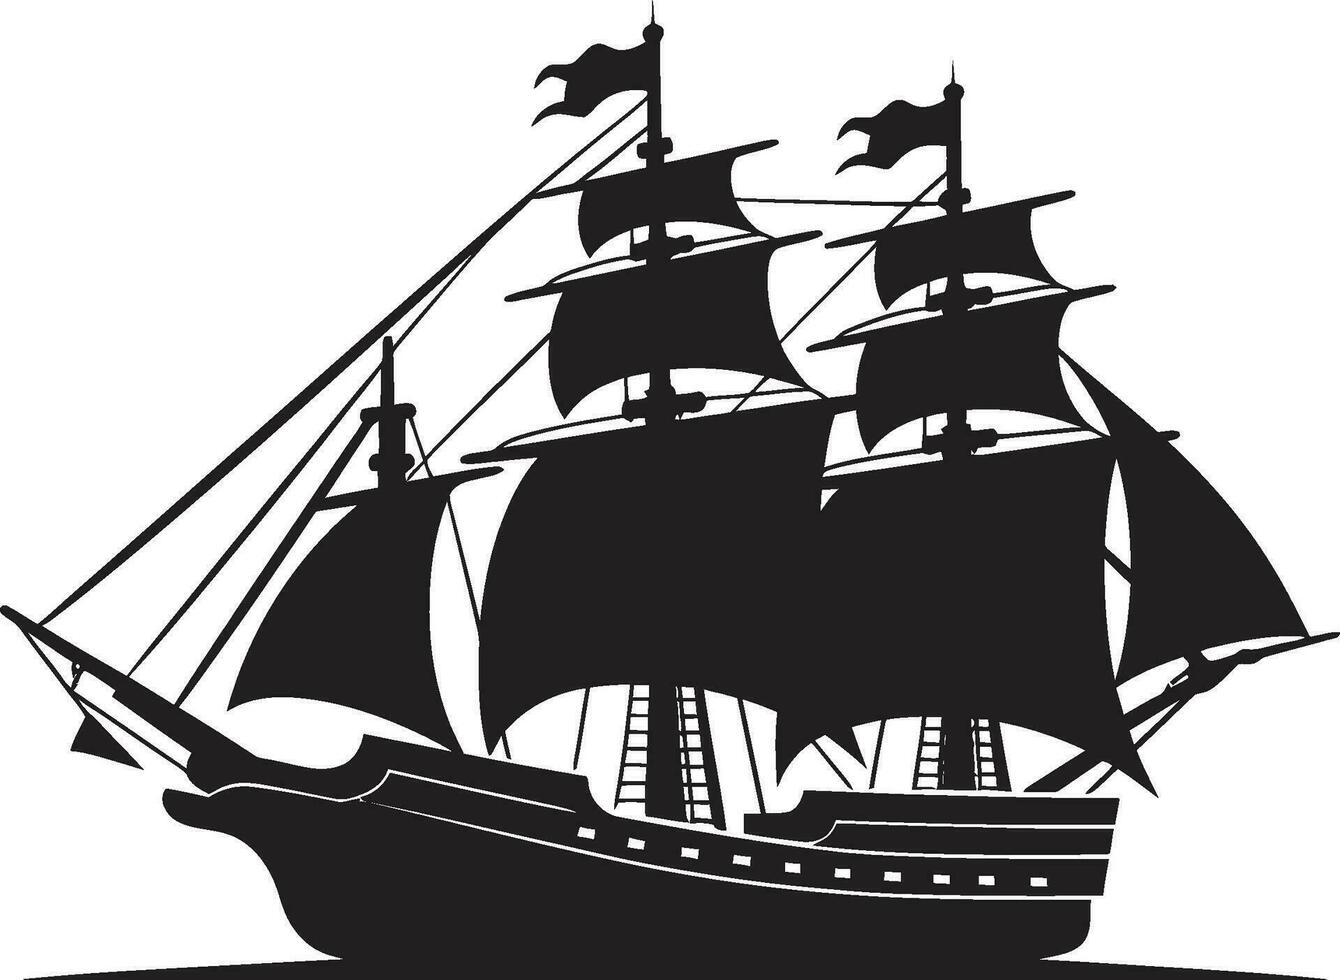 Vintage Seafaring Black Ship Vector Design Timeless Odyssey Ancient Ship Icon in Black